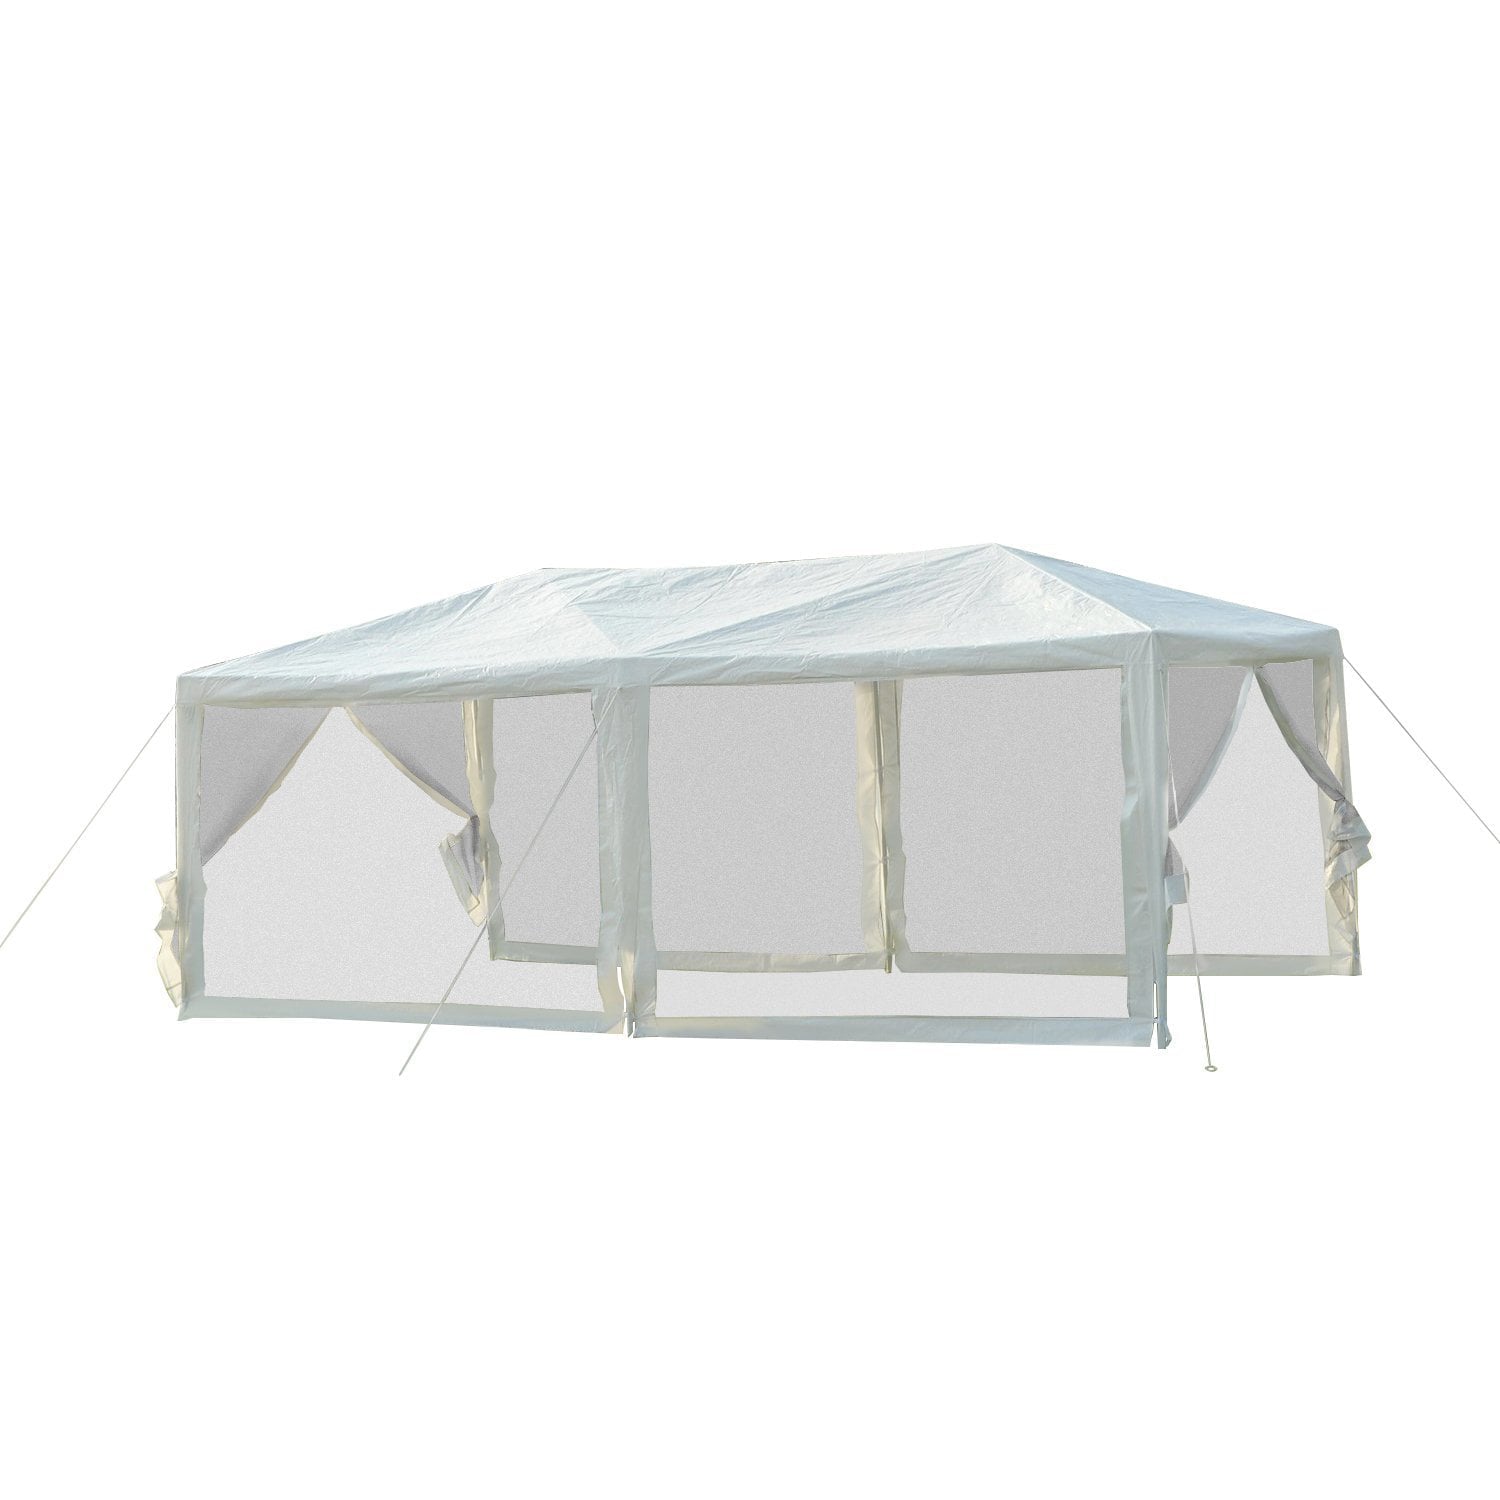 Outsunny 10' x 20' Canopy Tent Commercial Party Wedding Gazebo with Removable Netting Mesh Sidewalls, White